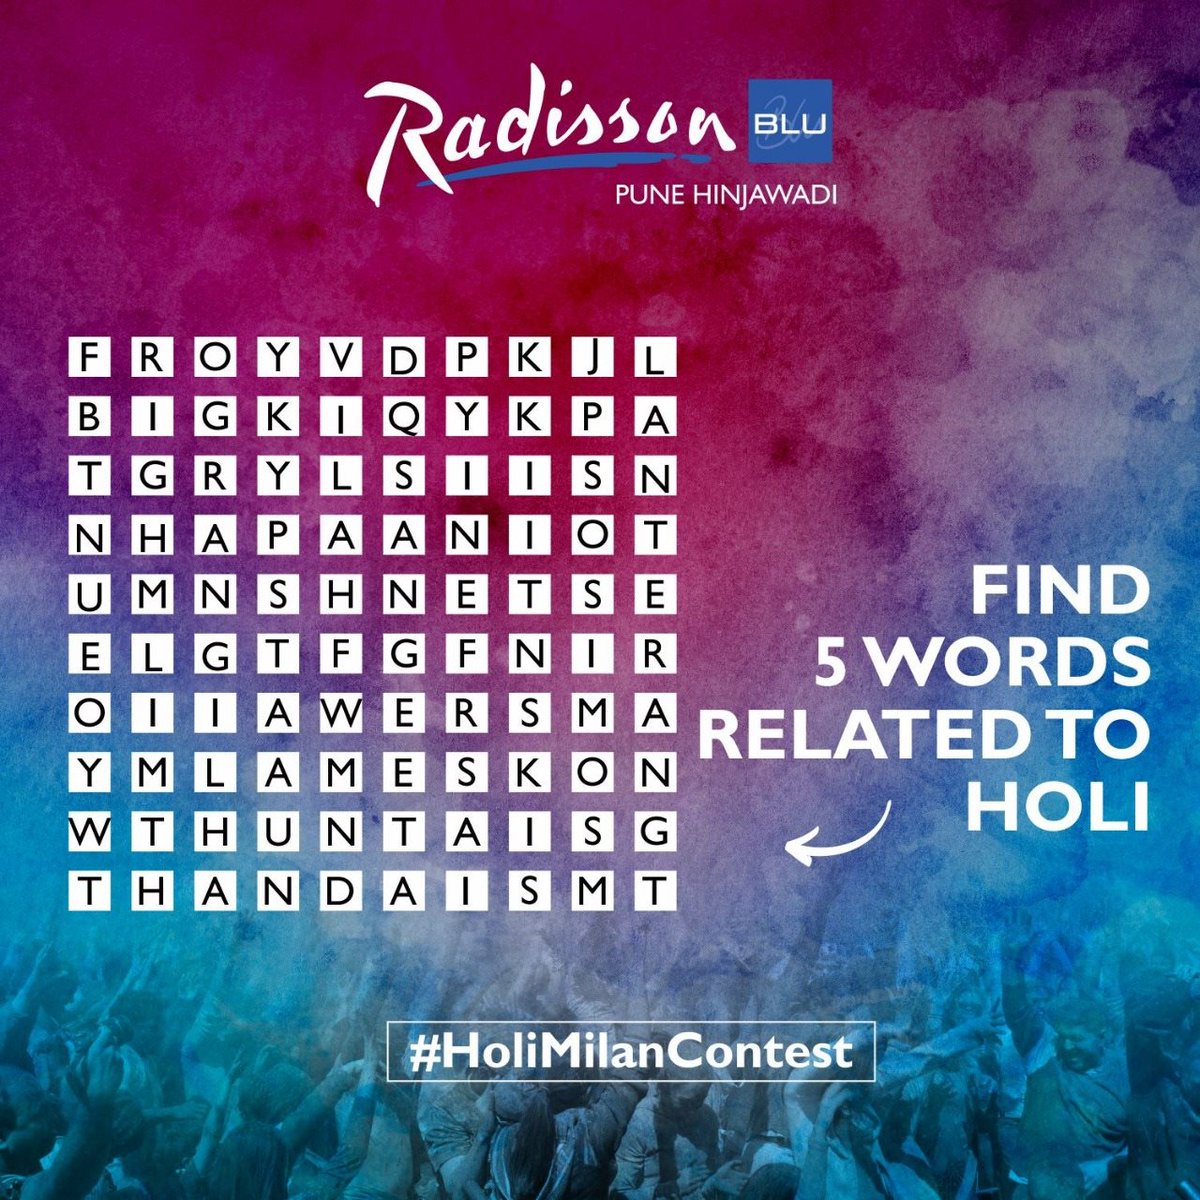 #ContestAlert

1- Participate in our #HoliMilan contest & Find 5 words related to Holi.

2- The winner will get Complimentary brunch vouchers for 2.

3- The contest dates: 16th March to 20th March

#RadissonBluPuneHinjawadi #ParticipateToWin #Contest #Giveaway #ContestIndia